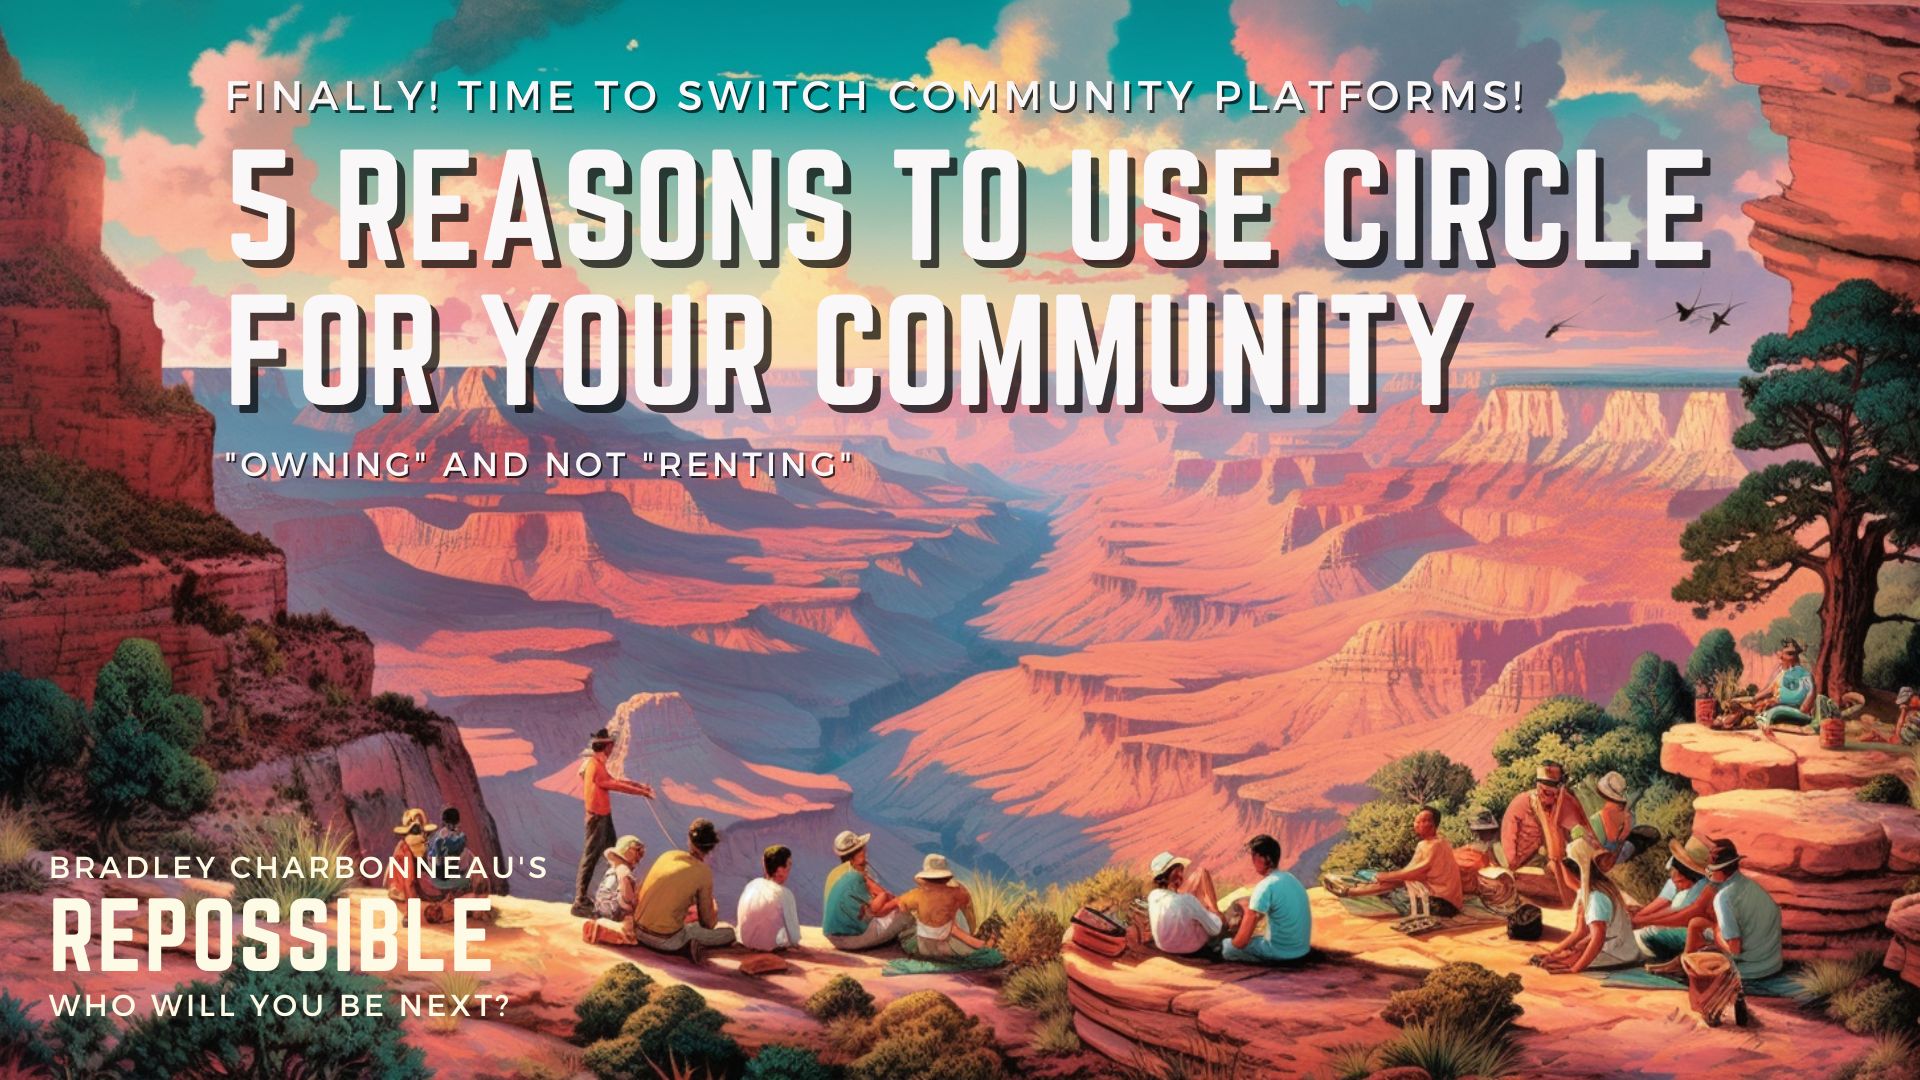 4 Tiny Reasons to Own Your Community Platform--and 1 Biggie!